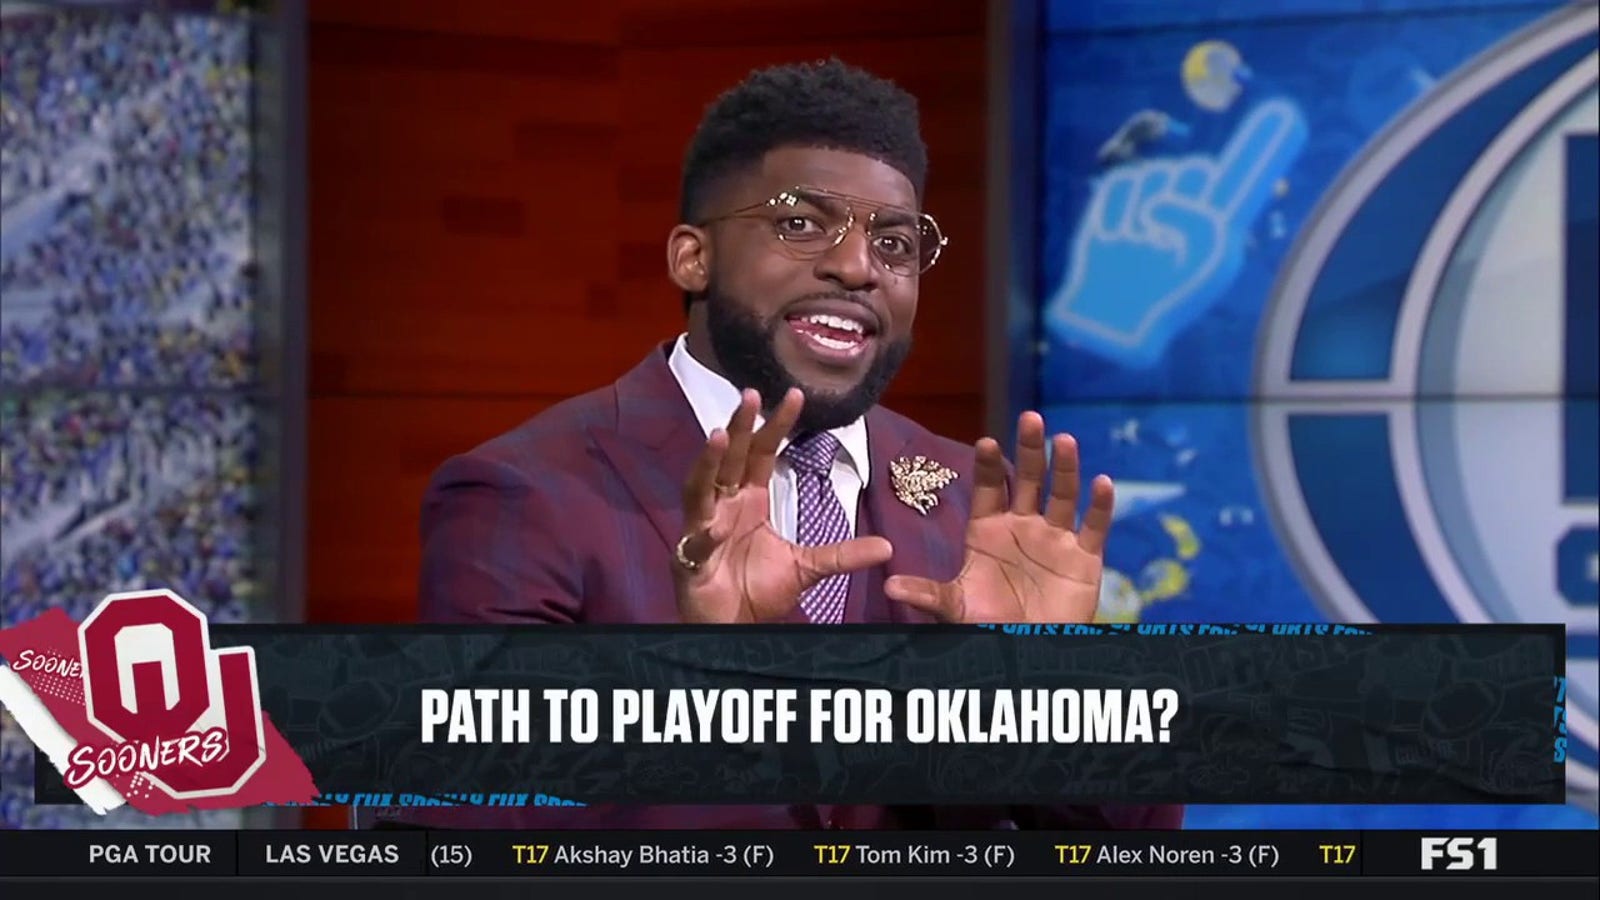 Does Oklahoma have a path to the College Football Playoff?